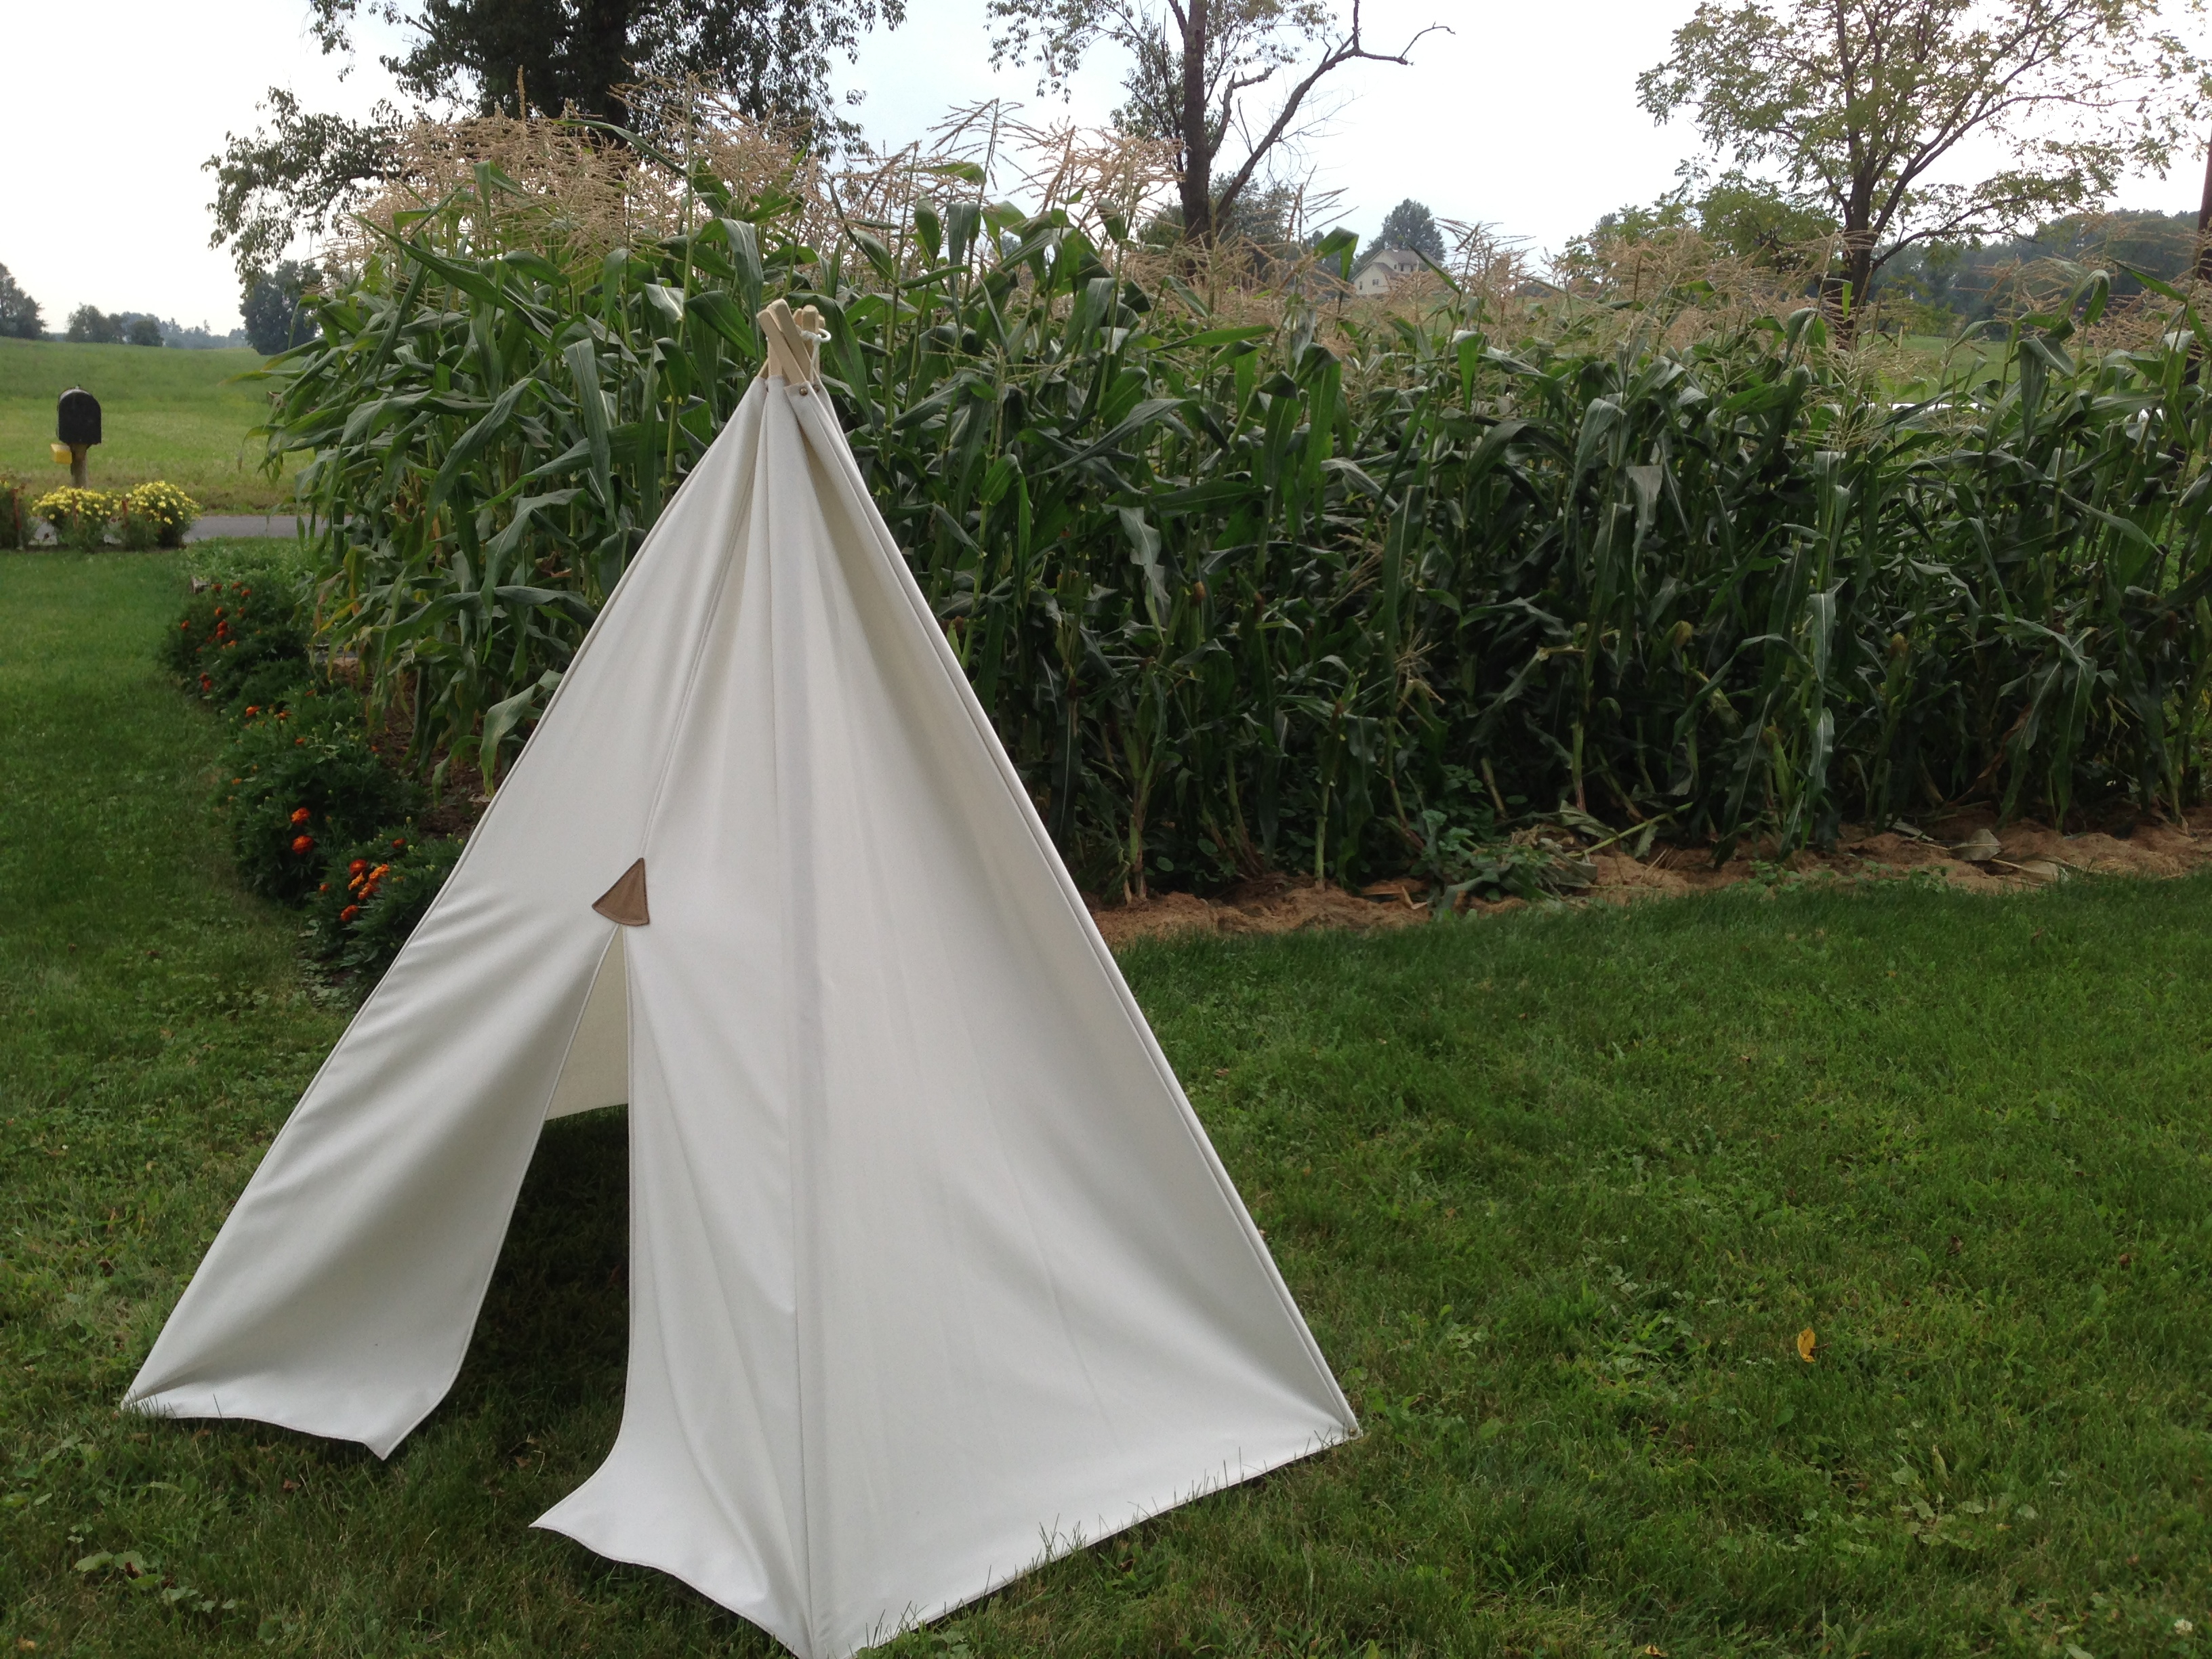 Fresh from the sewing machine, this Child's Teepee tent stands next to Sarah's sweet corn bed.